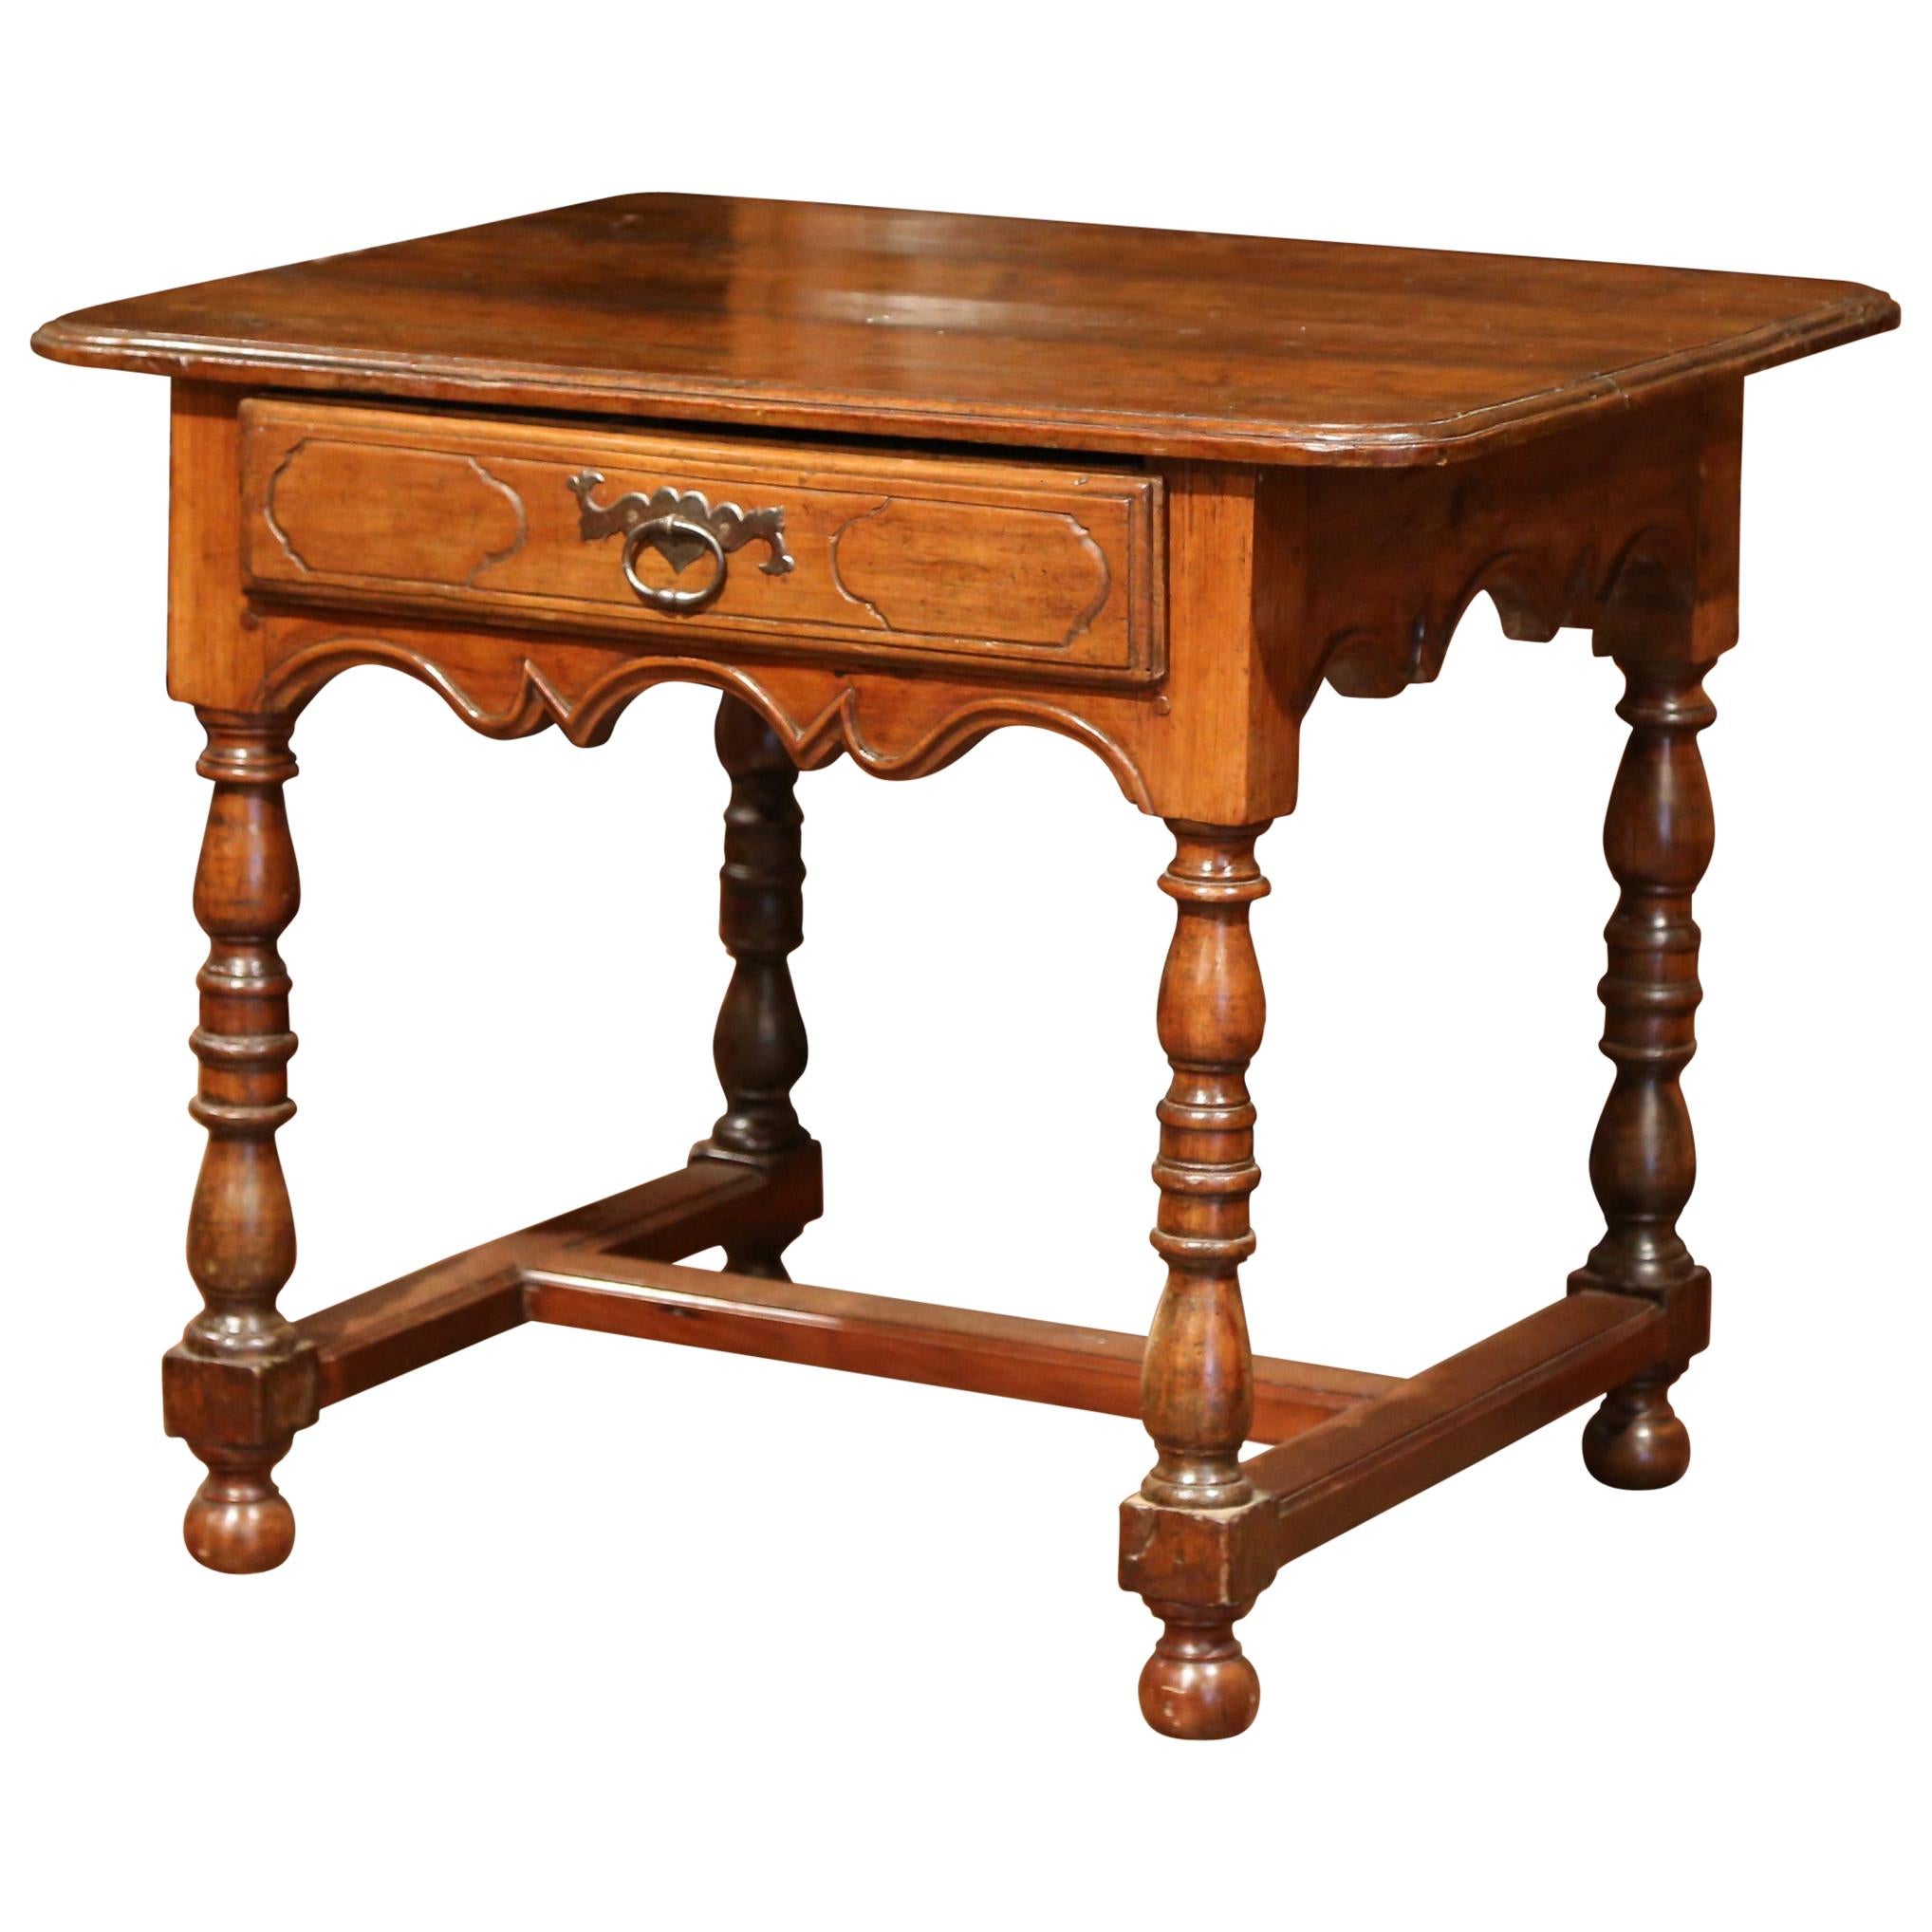 Mid-18th Century, French, Louis XIII Carved Walnut Table Desk with Center Drawer